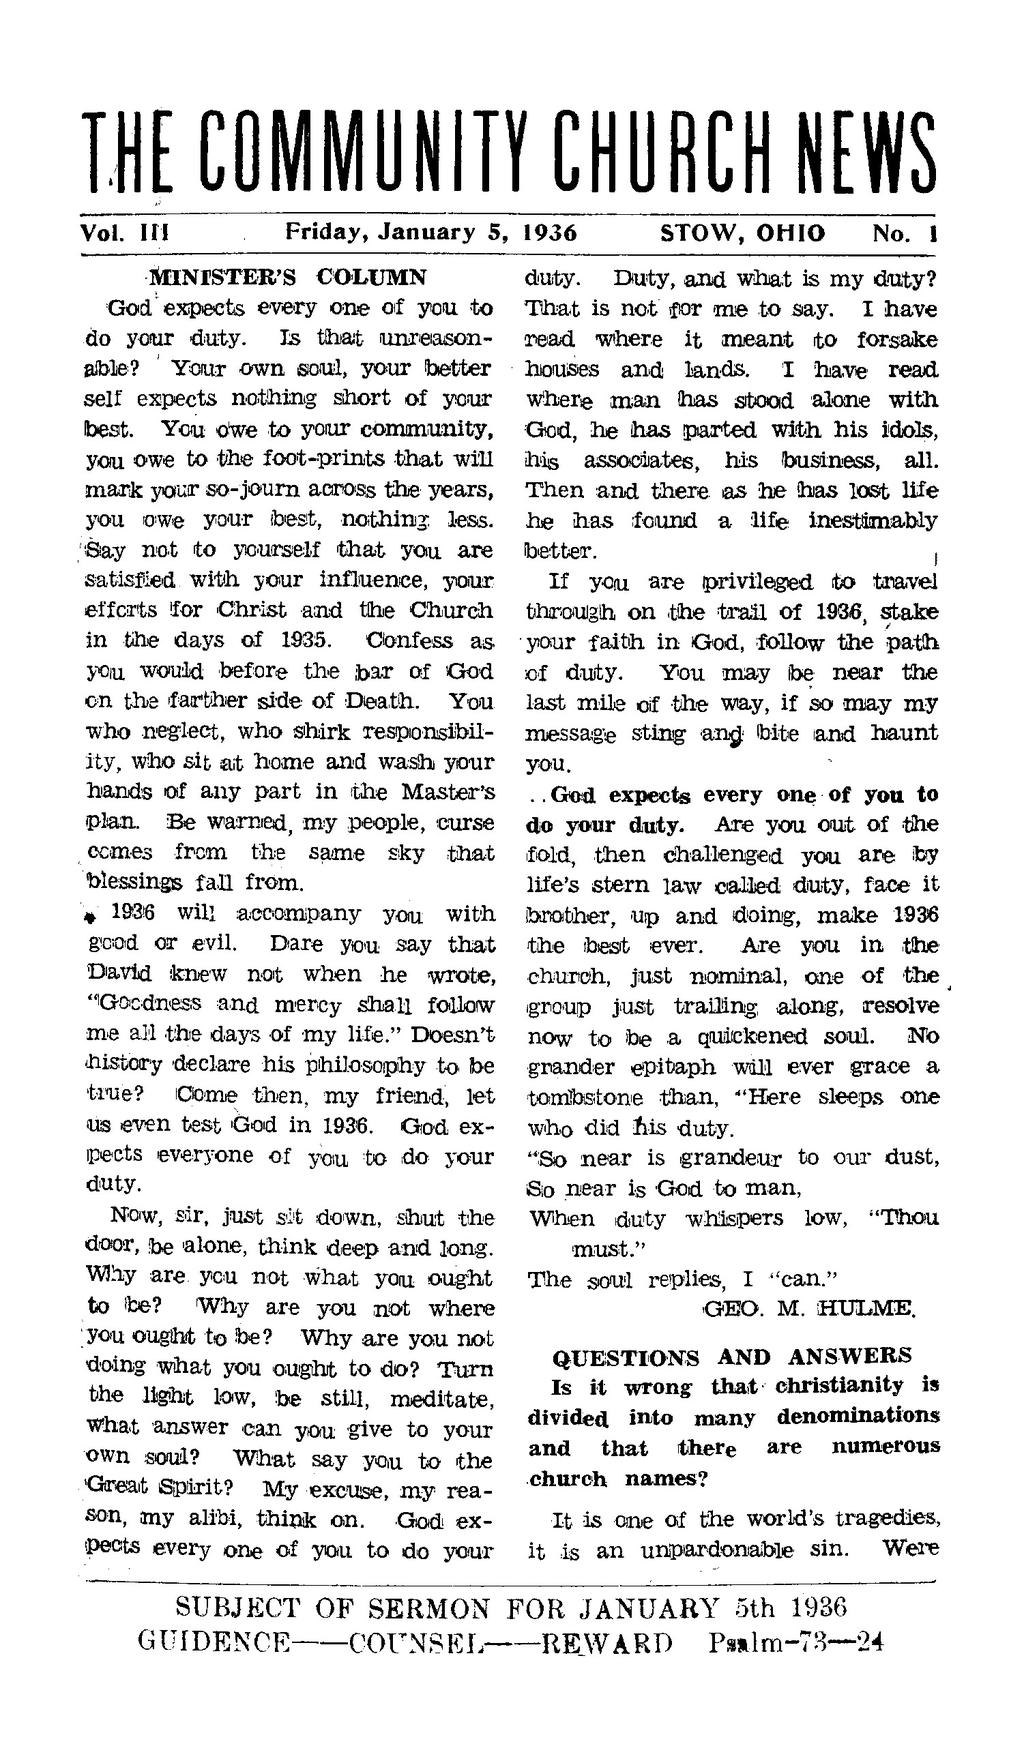 THE COMMUNITY CHURCH NEWS vol. in Friday, January S, 1936 STOW, OHIO No. MINISTER'S COLUMN God, expects every one of you to do your duty. Is that unreasonaible?